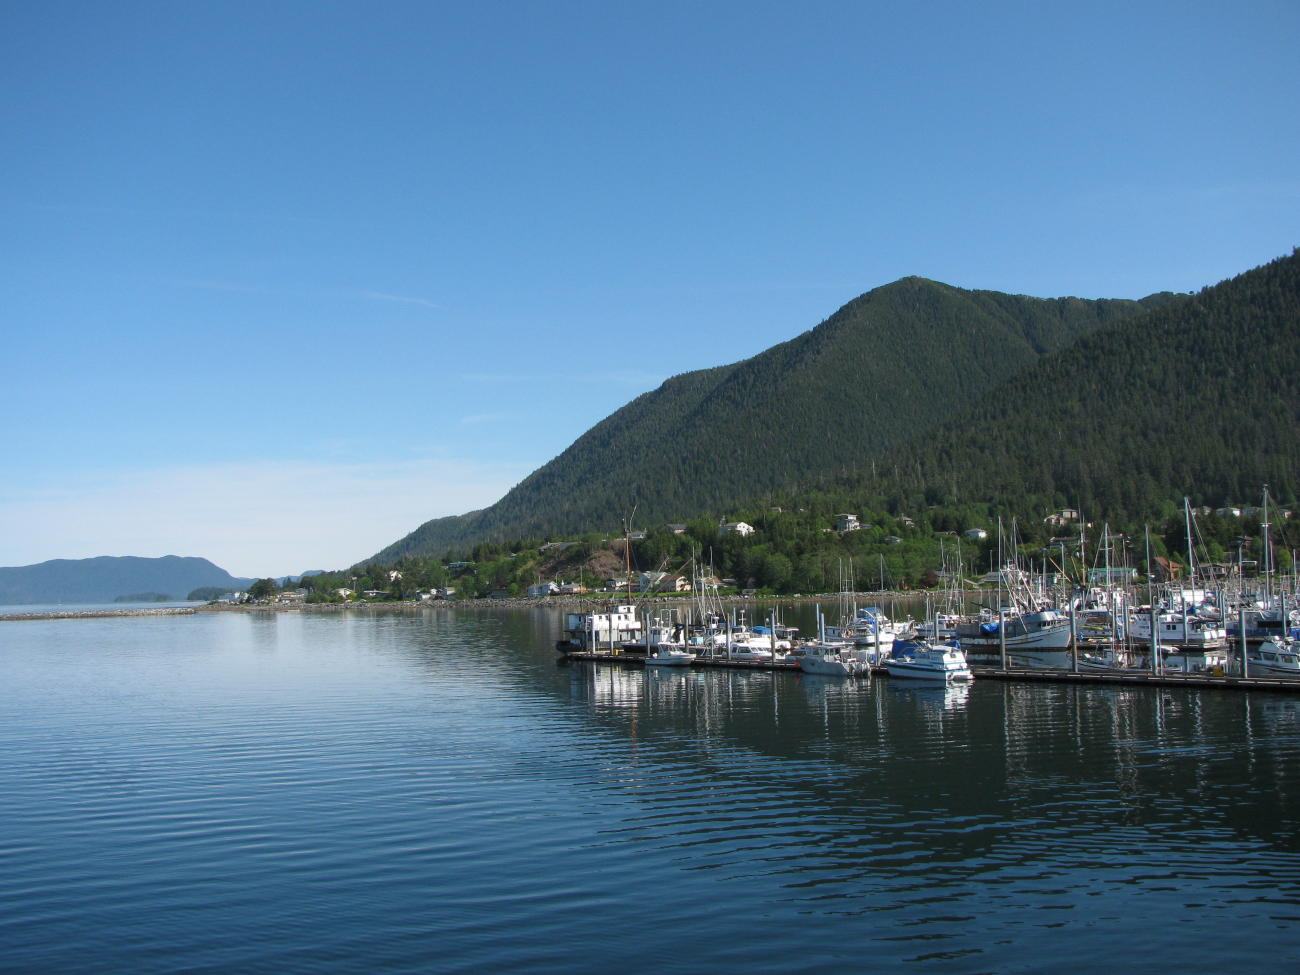 Looking north along Sitka's waterfront